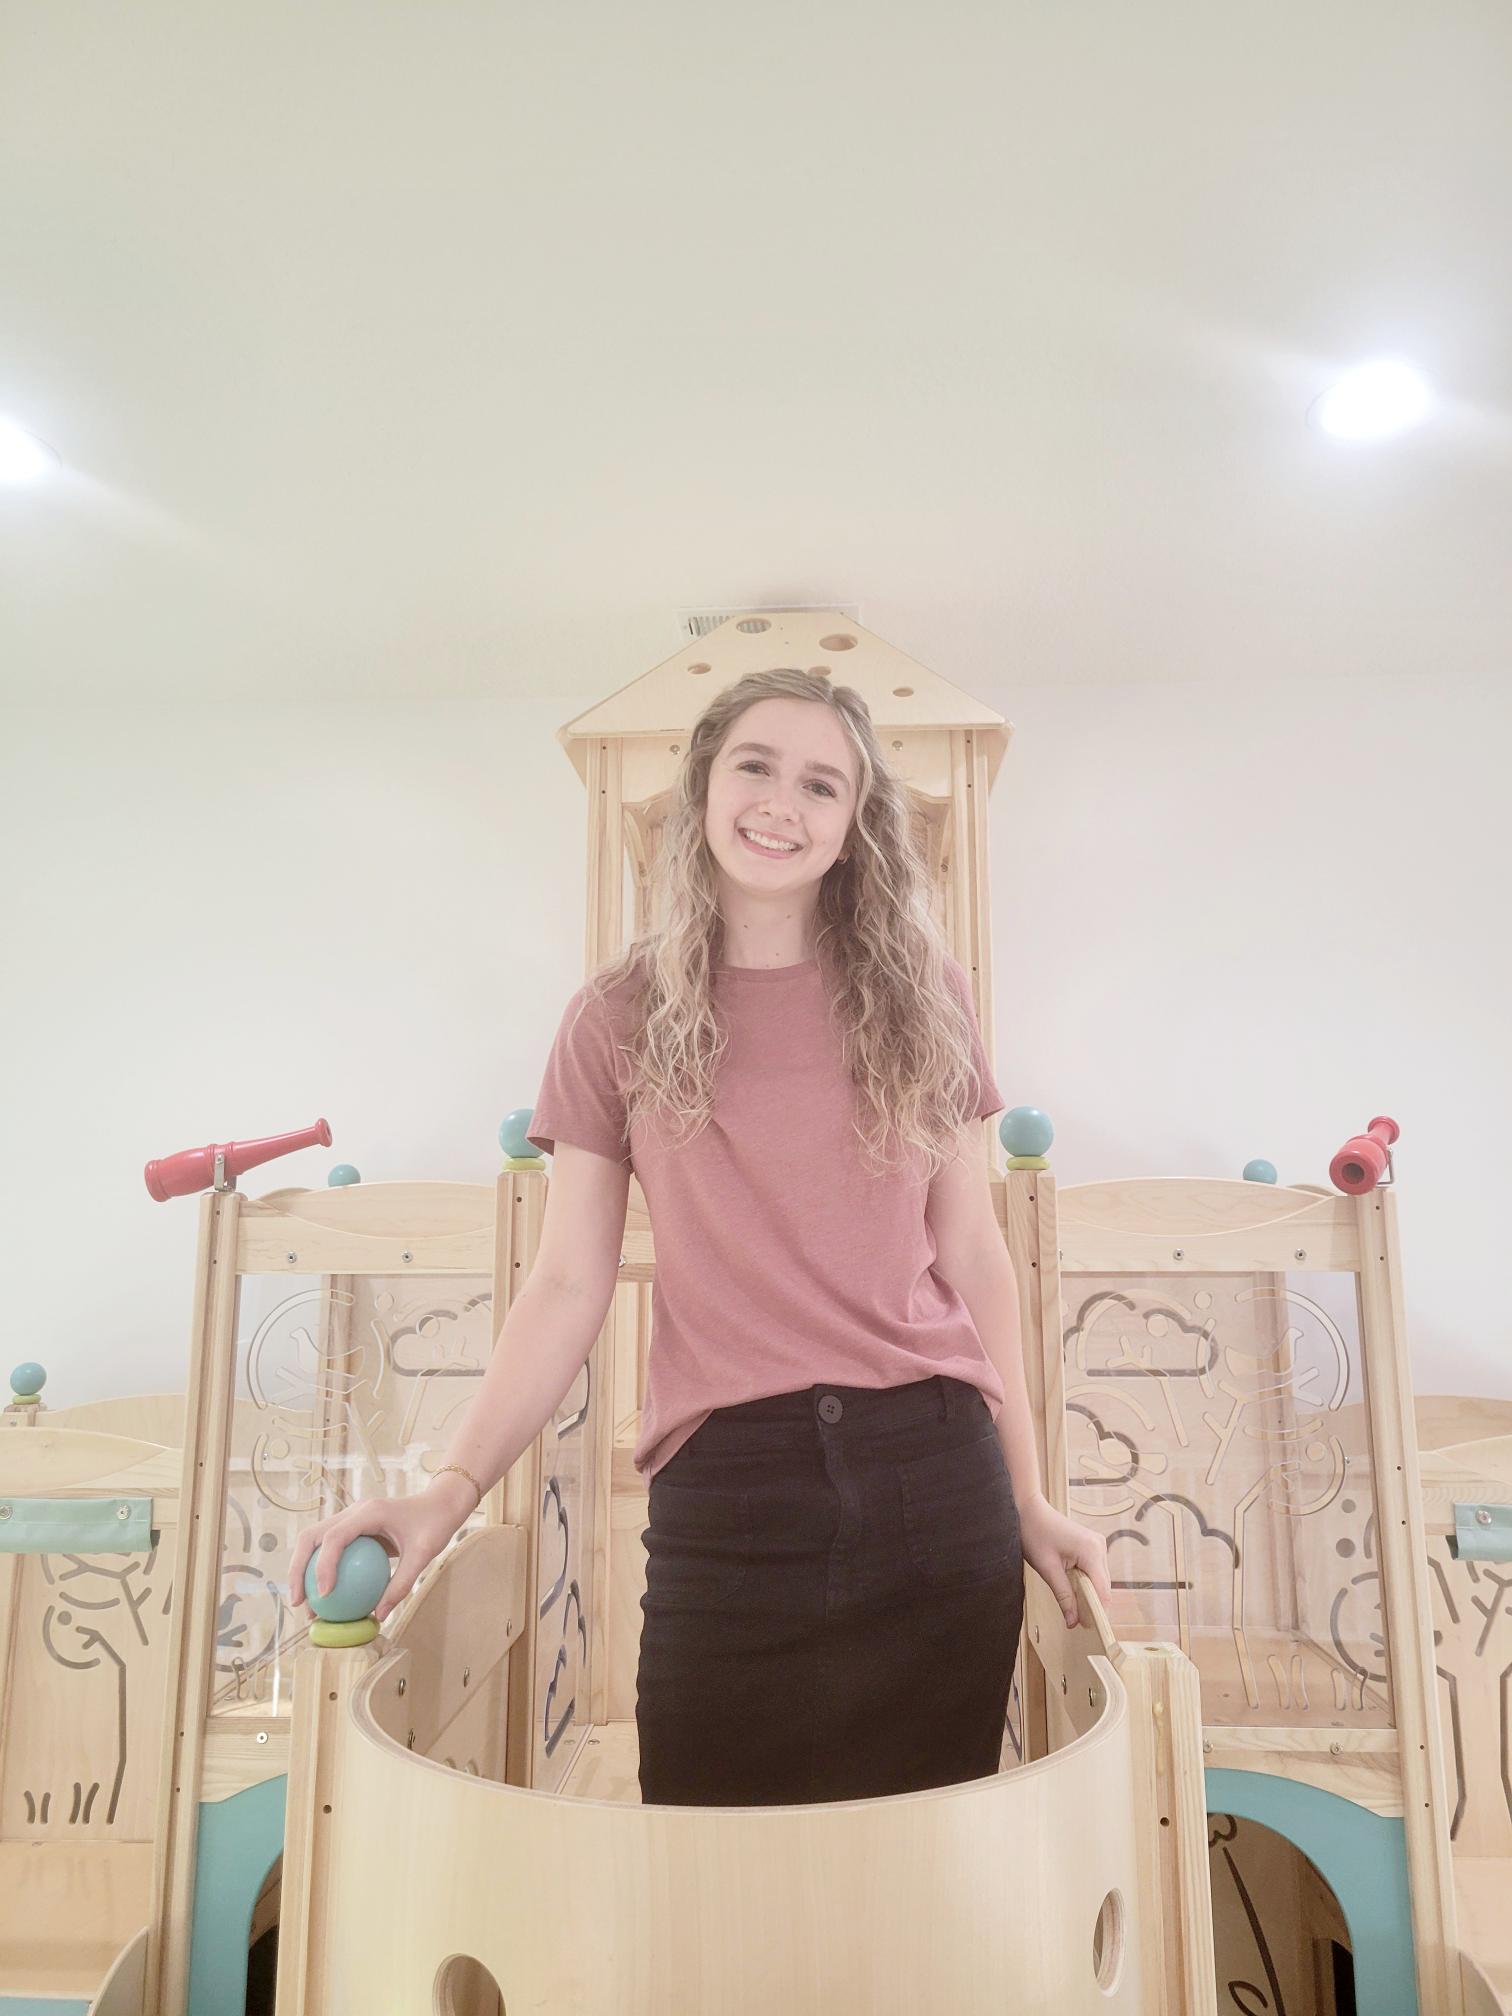 Sierra wearing a pink t-shirt and black pants standing on a wooden jungle gym platform